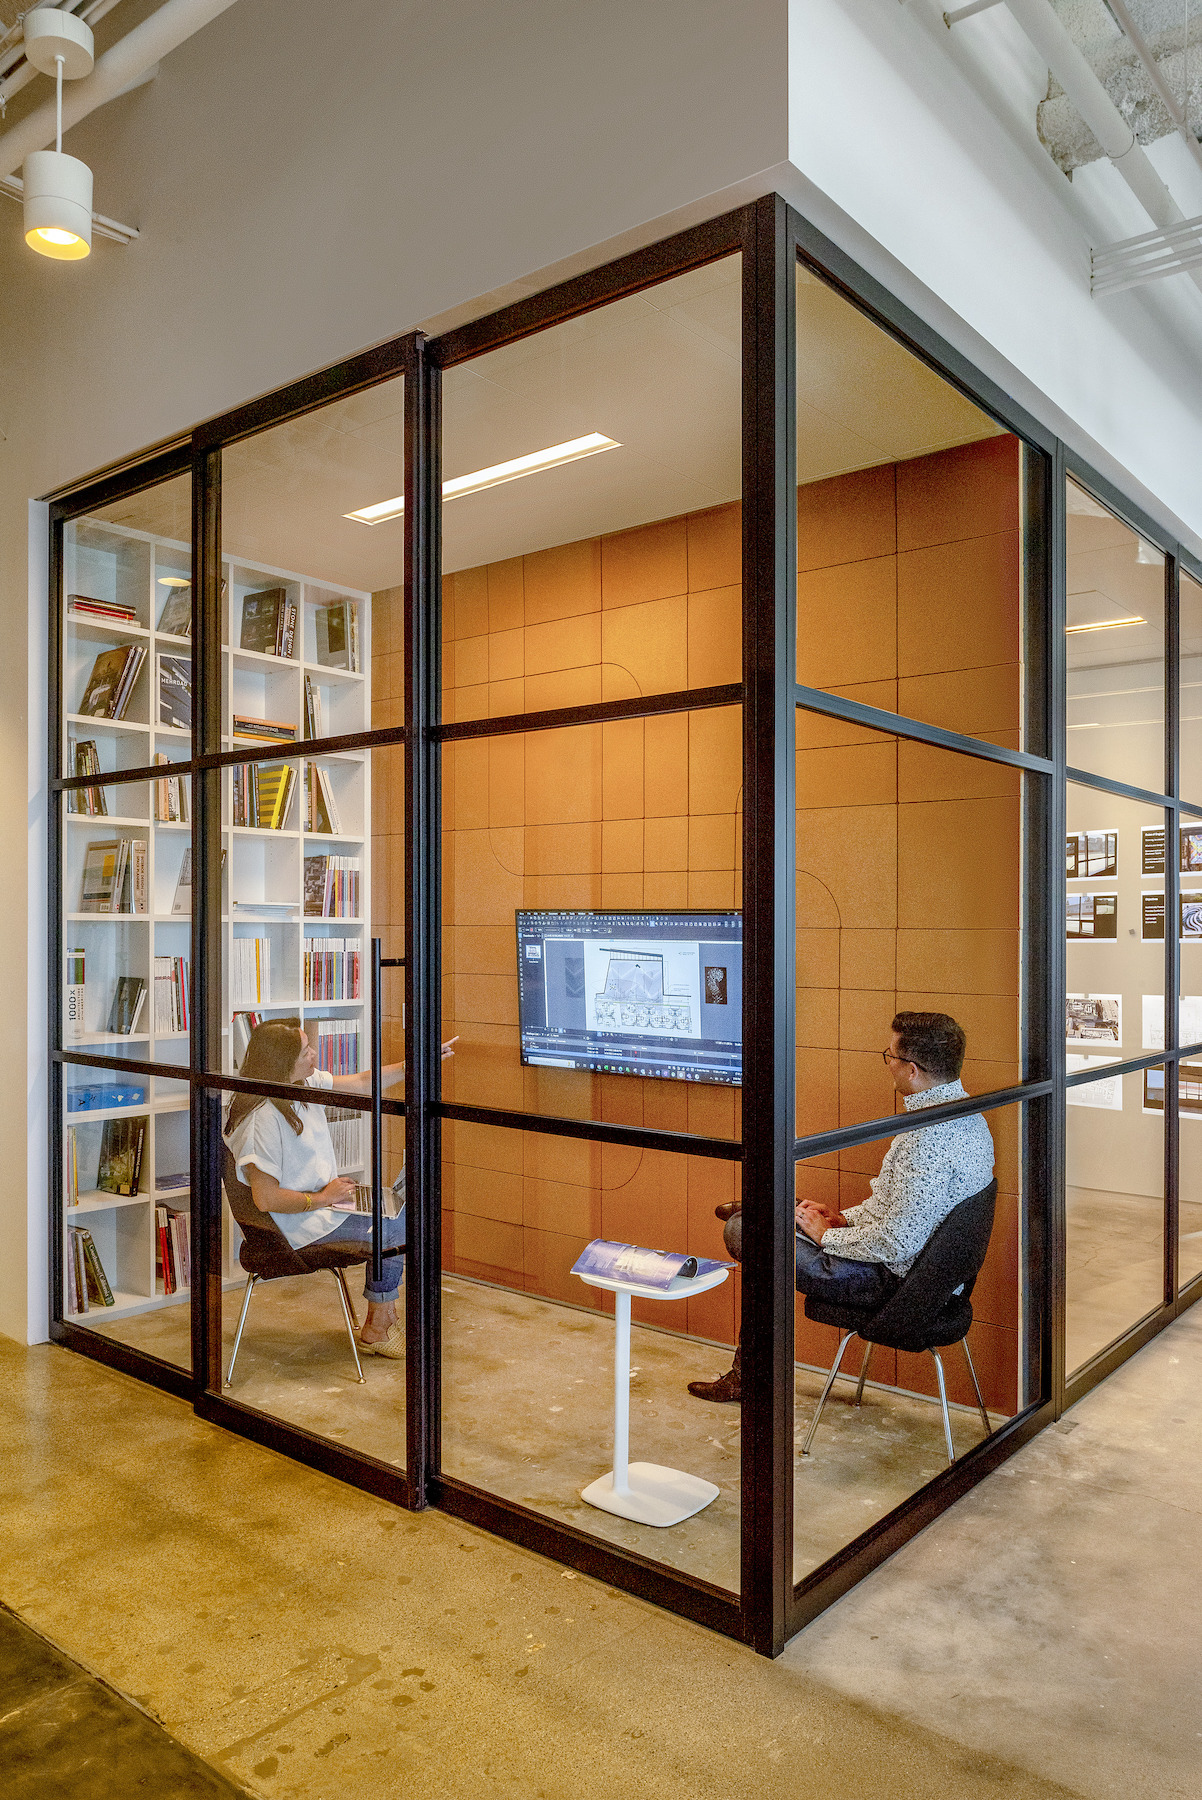 CannonDesign's offices offer privacy